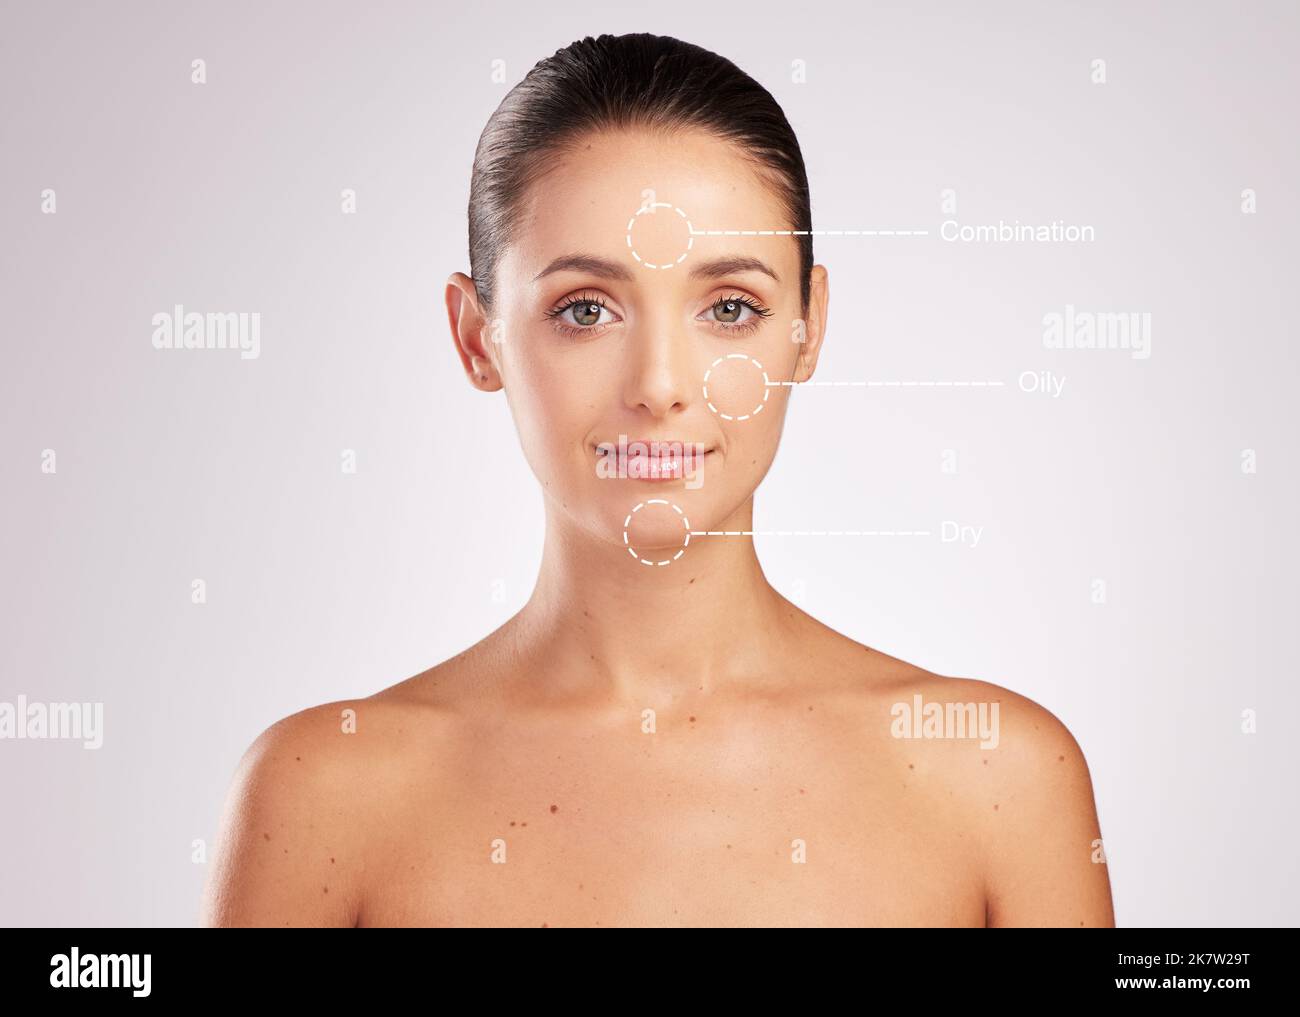 Whatever your skin type youre still beautiful. an attractive young woman with skin types indicated on her face against a studio background. Stock Photo